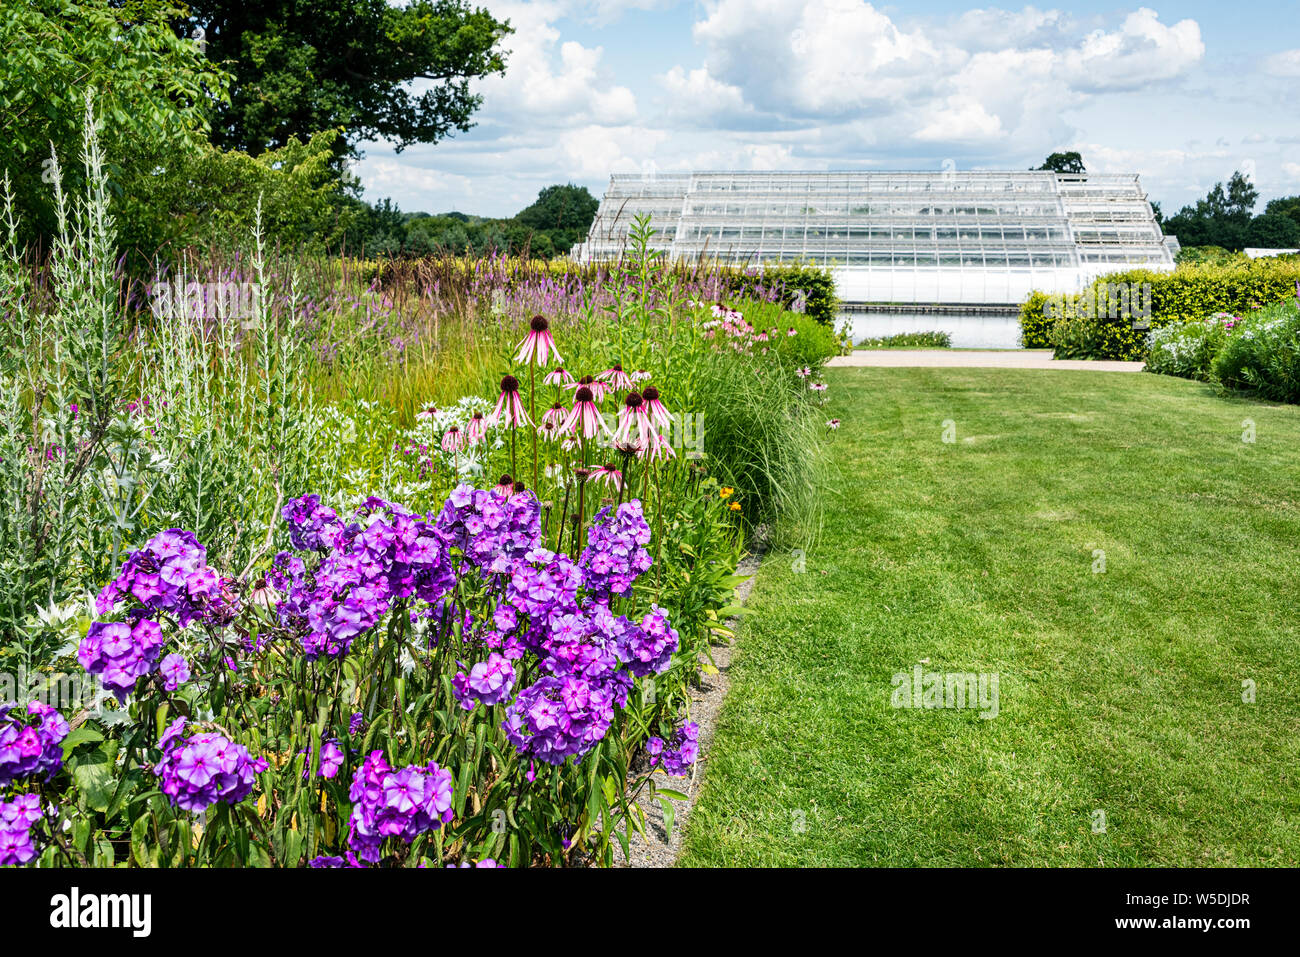 The Glasshouse at RHS Wisley. Mixed summer flower borders in the foreground. Stock Photo